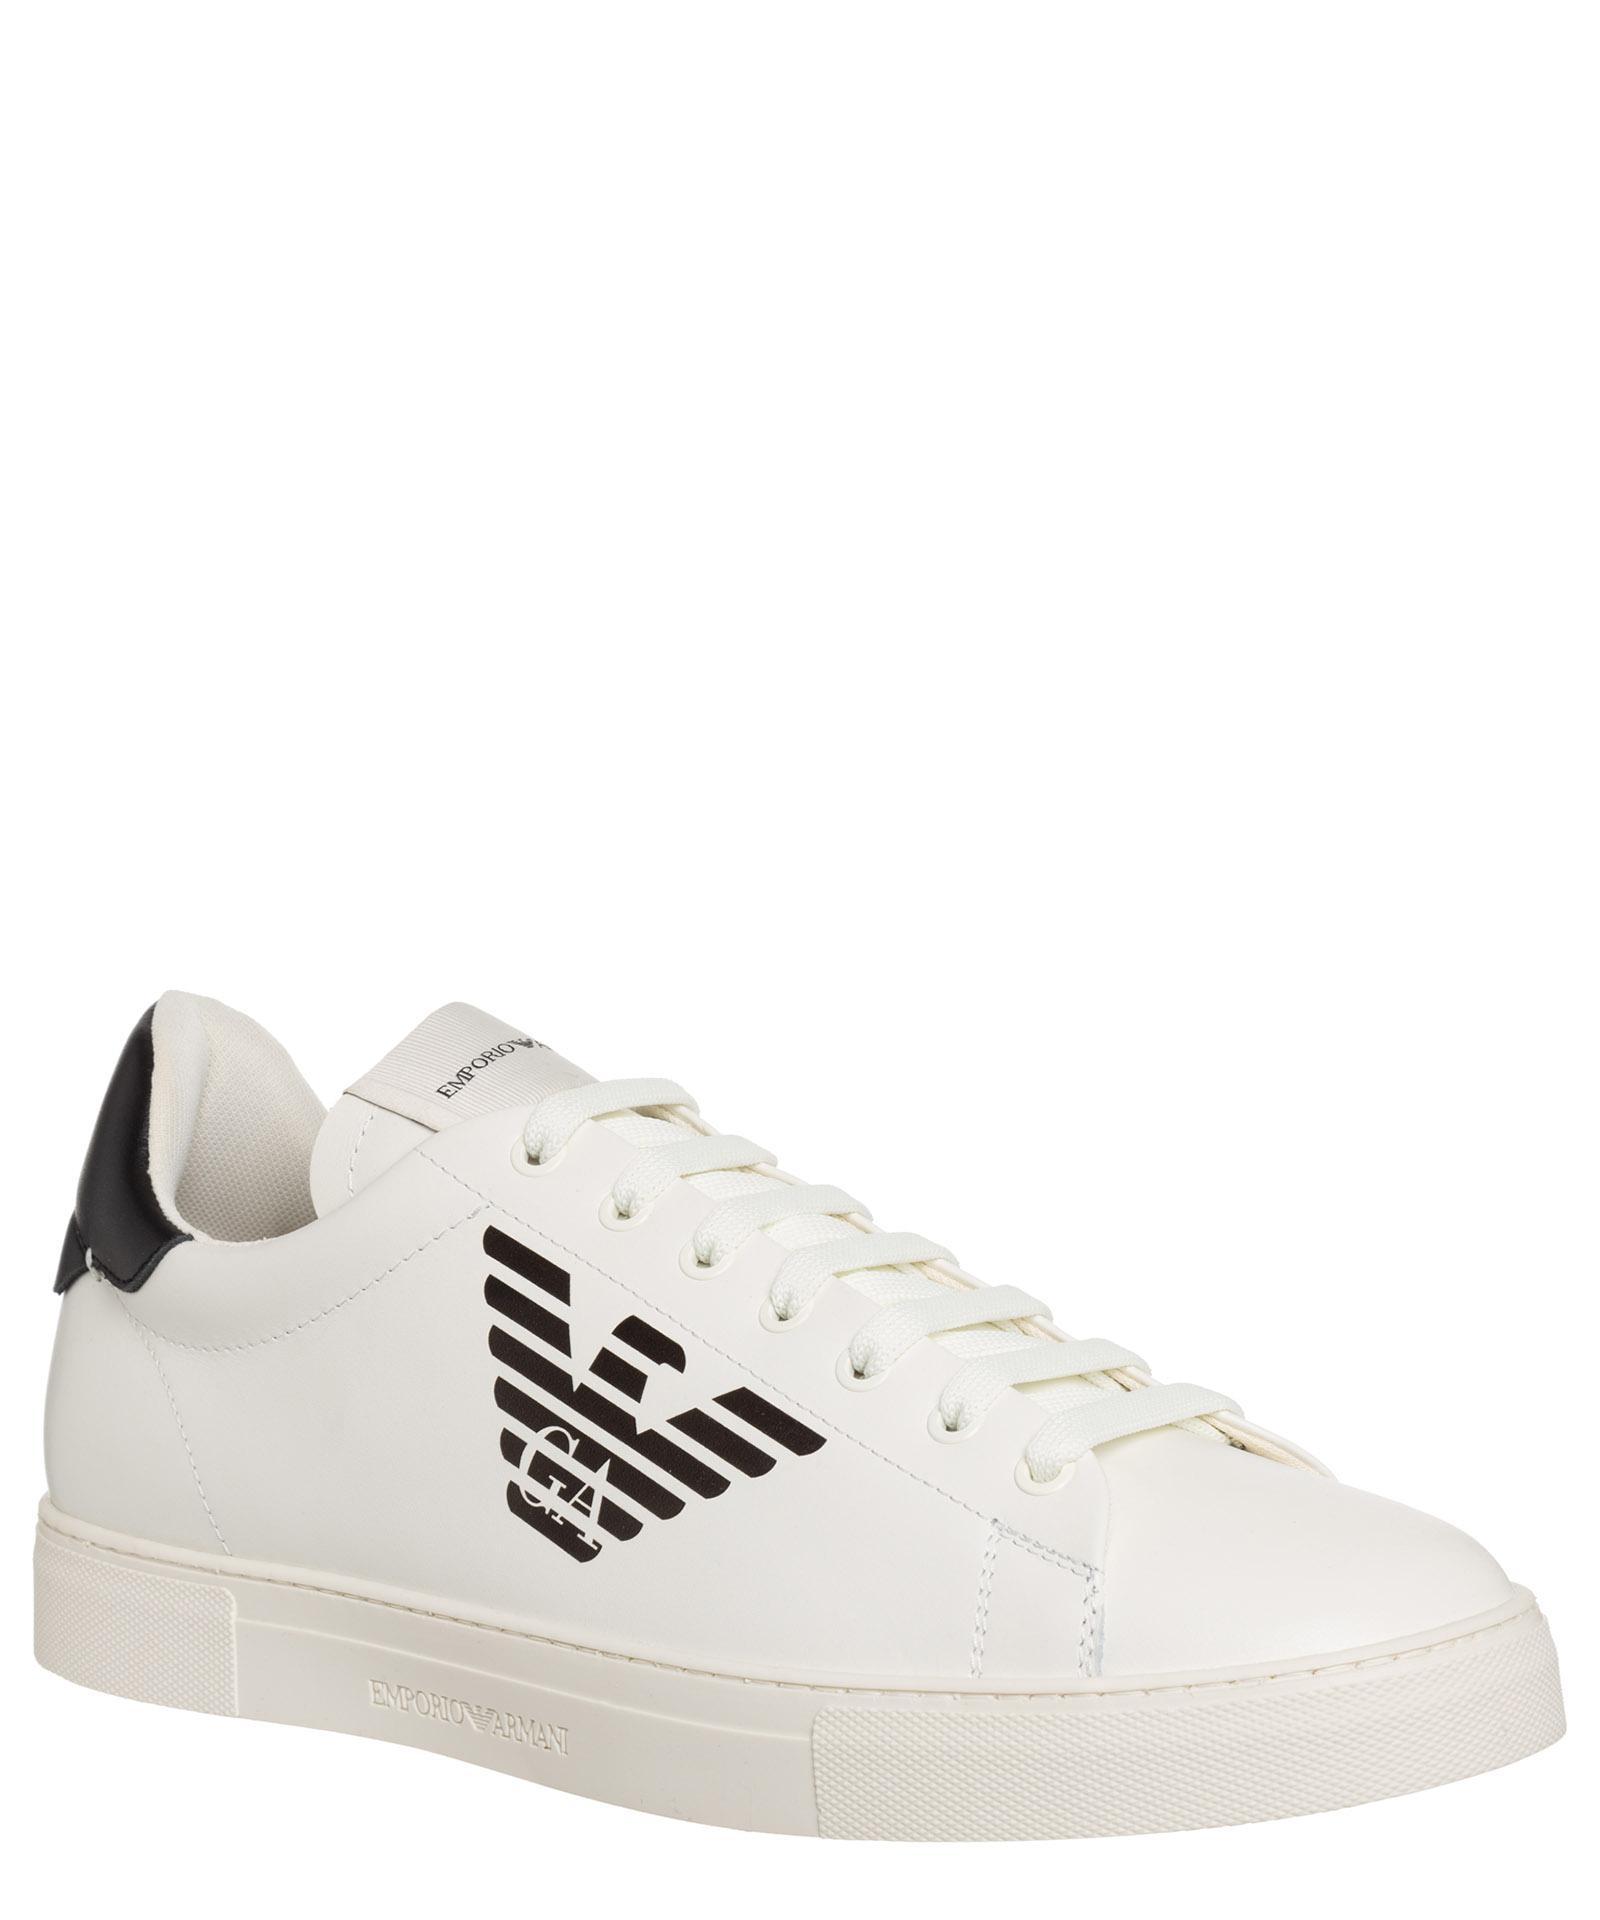 Thriller Wrinkles Cape Emporio Armani Sneakers in White for Men | Lyst